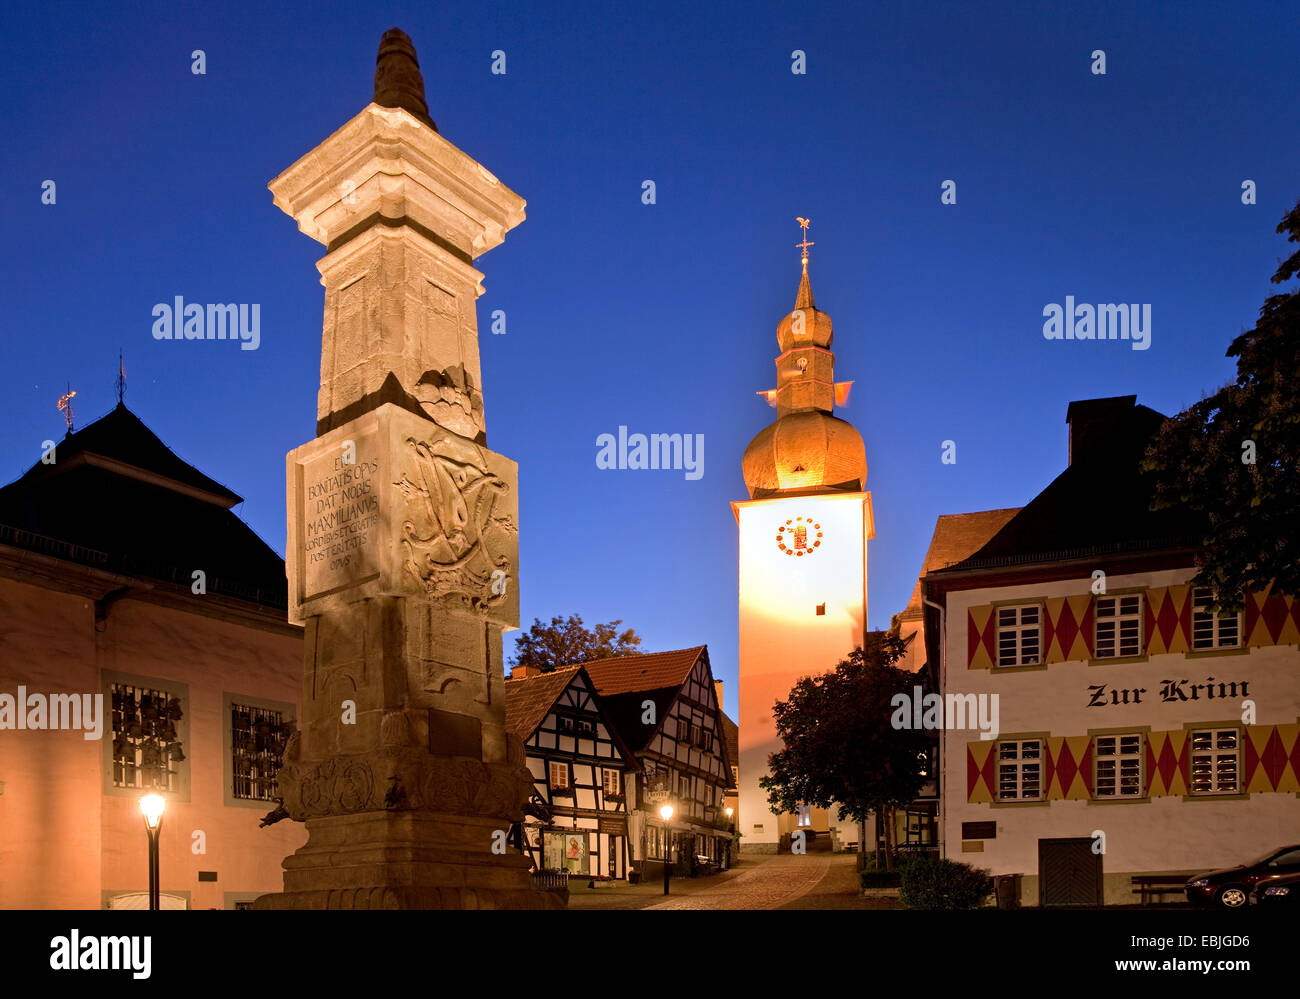 Maximilianbrunnen at the Alter Markt with the town hall and the belfry at dusk, Germany, North Rhine-Westphalia, Sauerland, Arnsberg Stock Photo